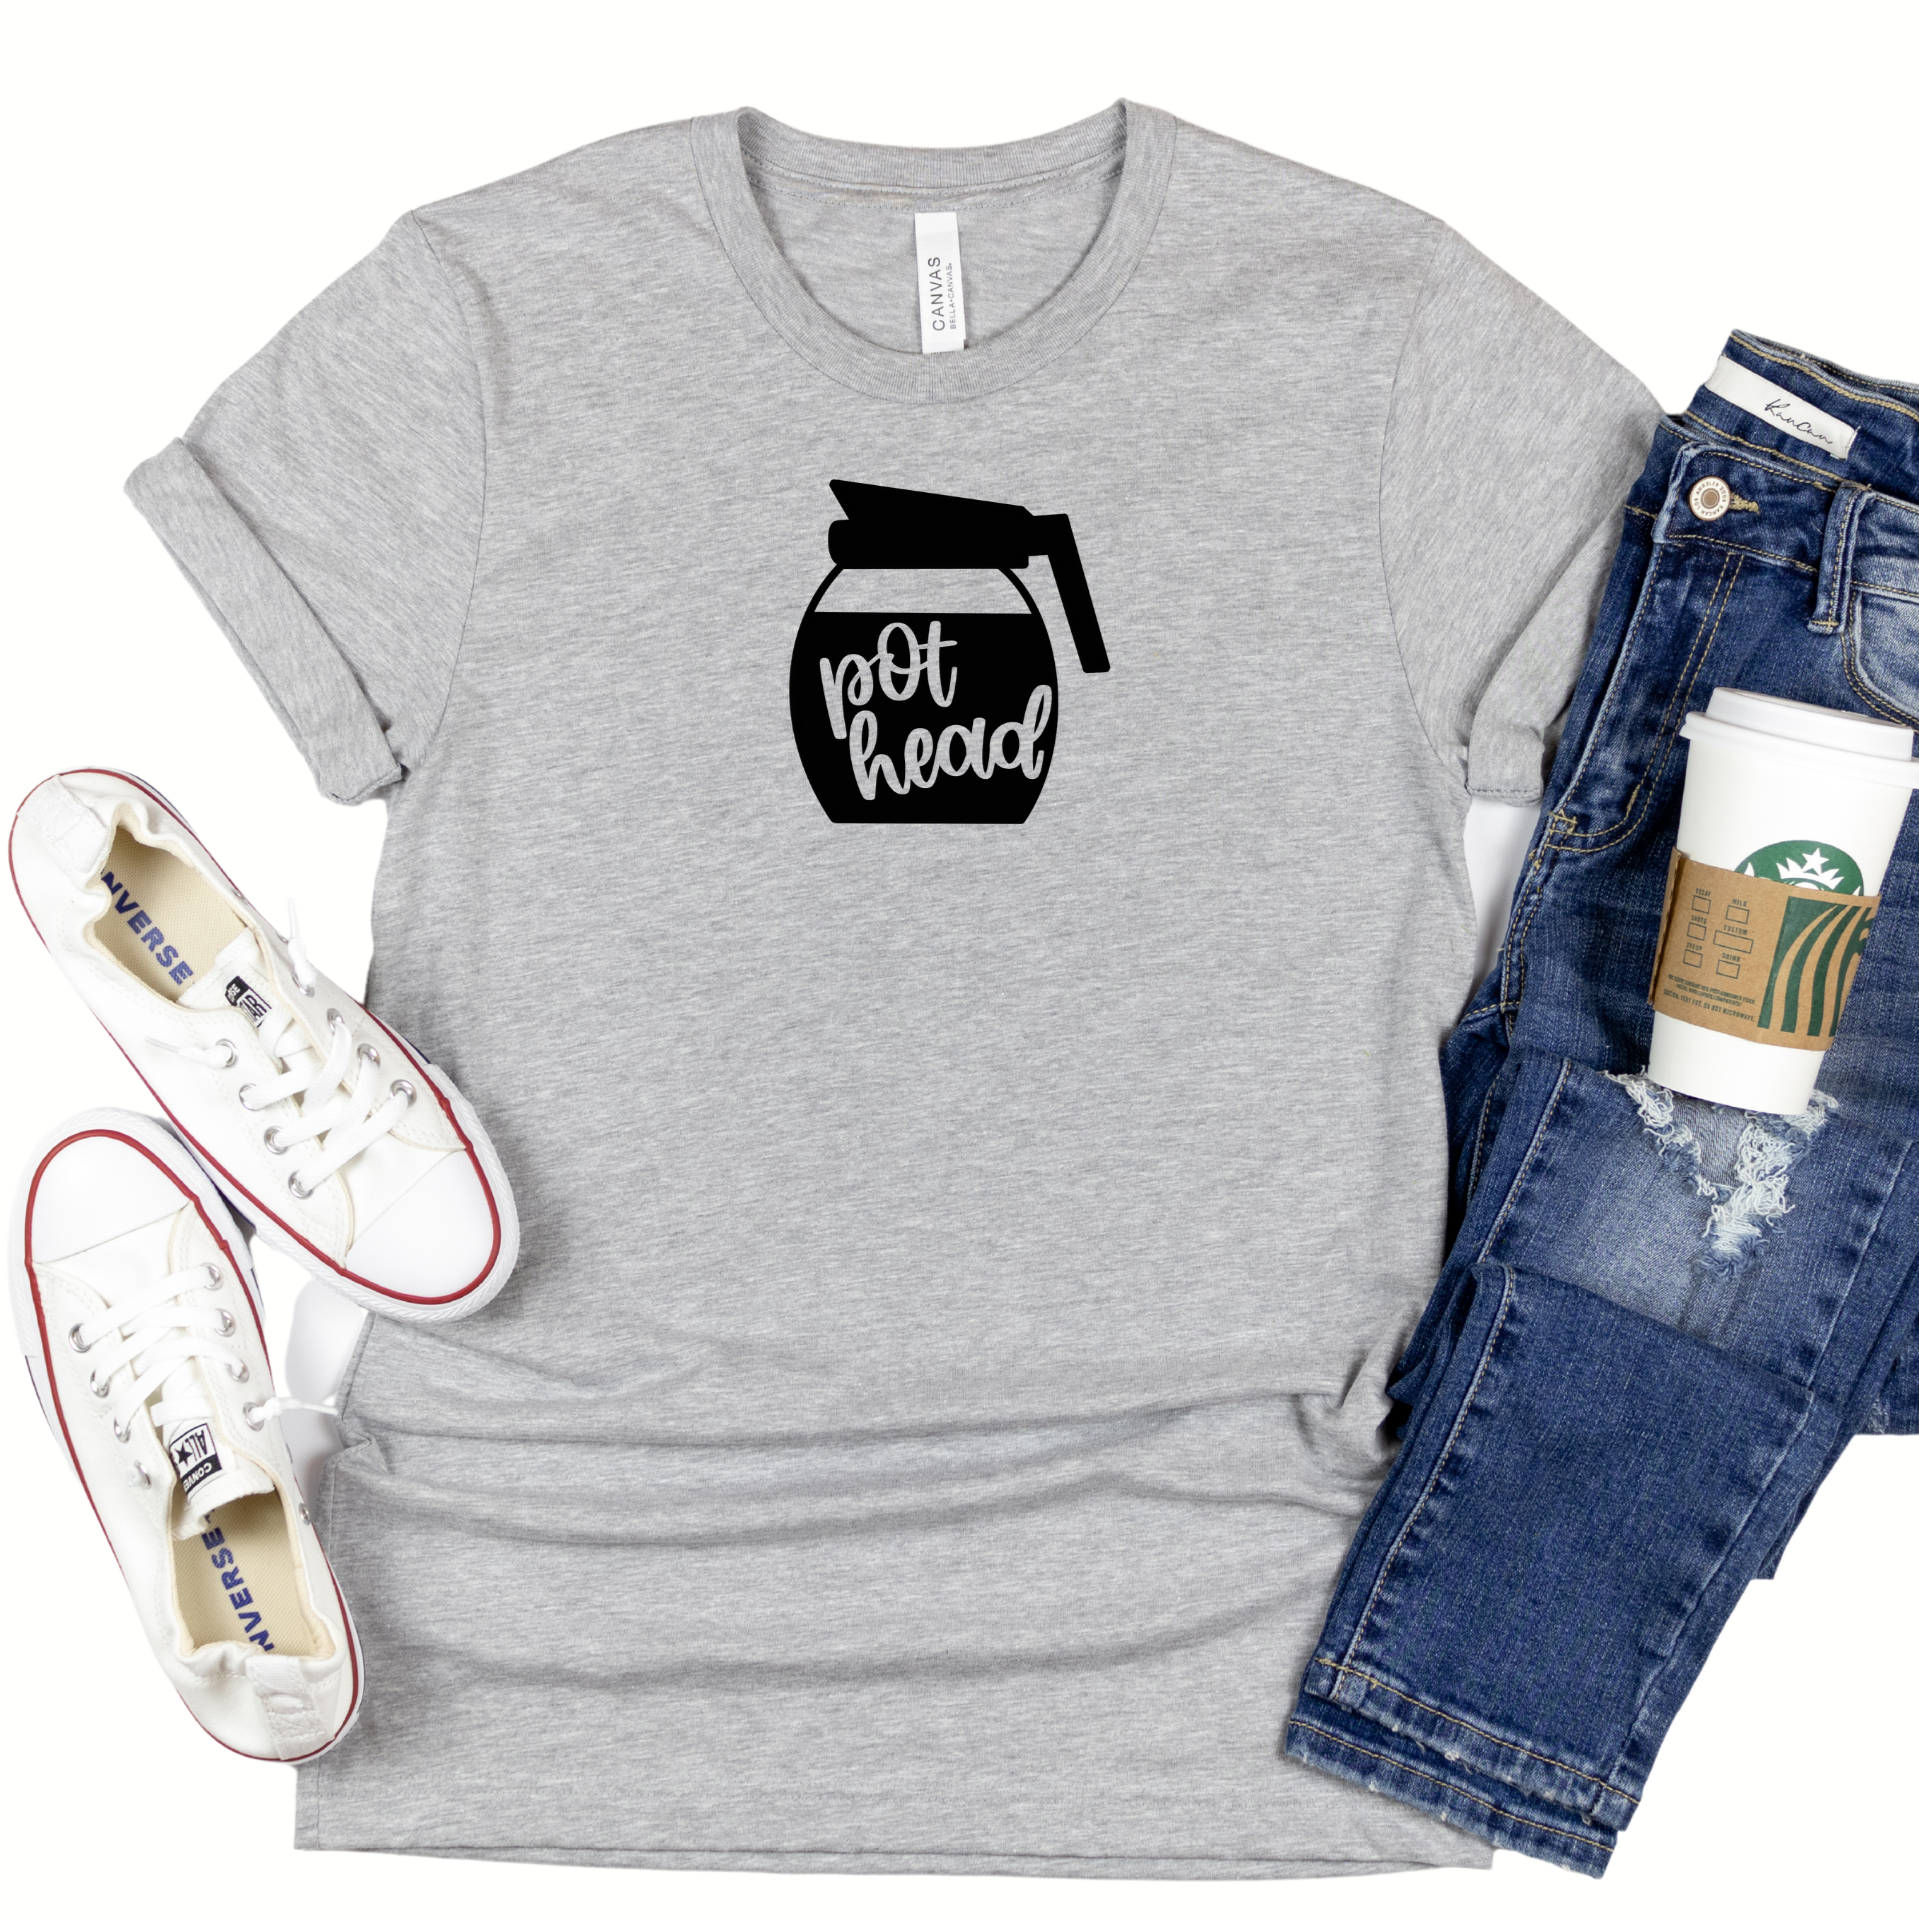 A black coffee pot with pot head in script cut out in the coffee within the pot on an athletic heather 3001cvc Bella Canvas t-shirt.